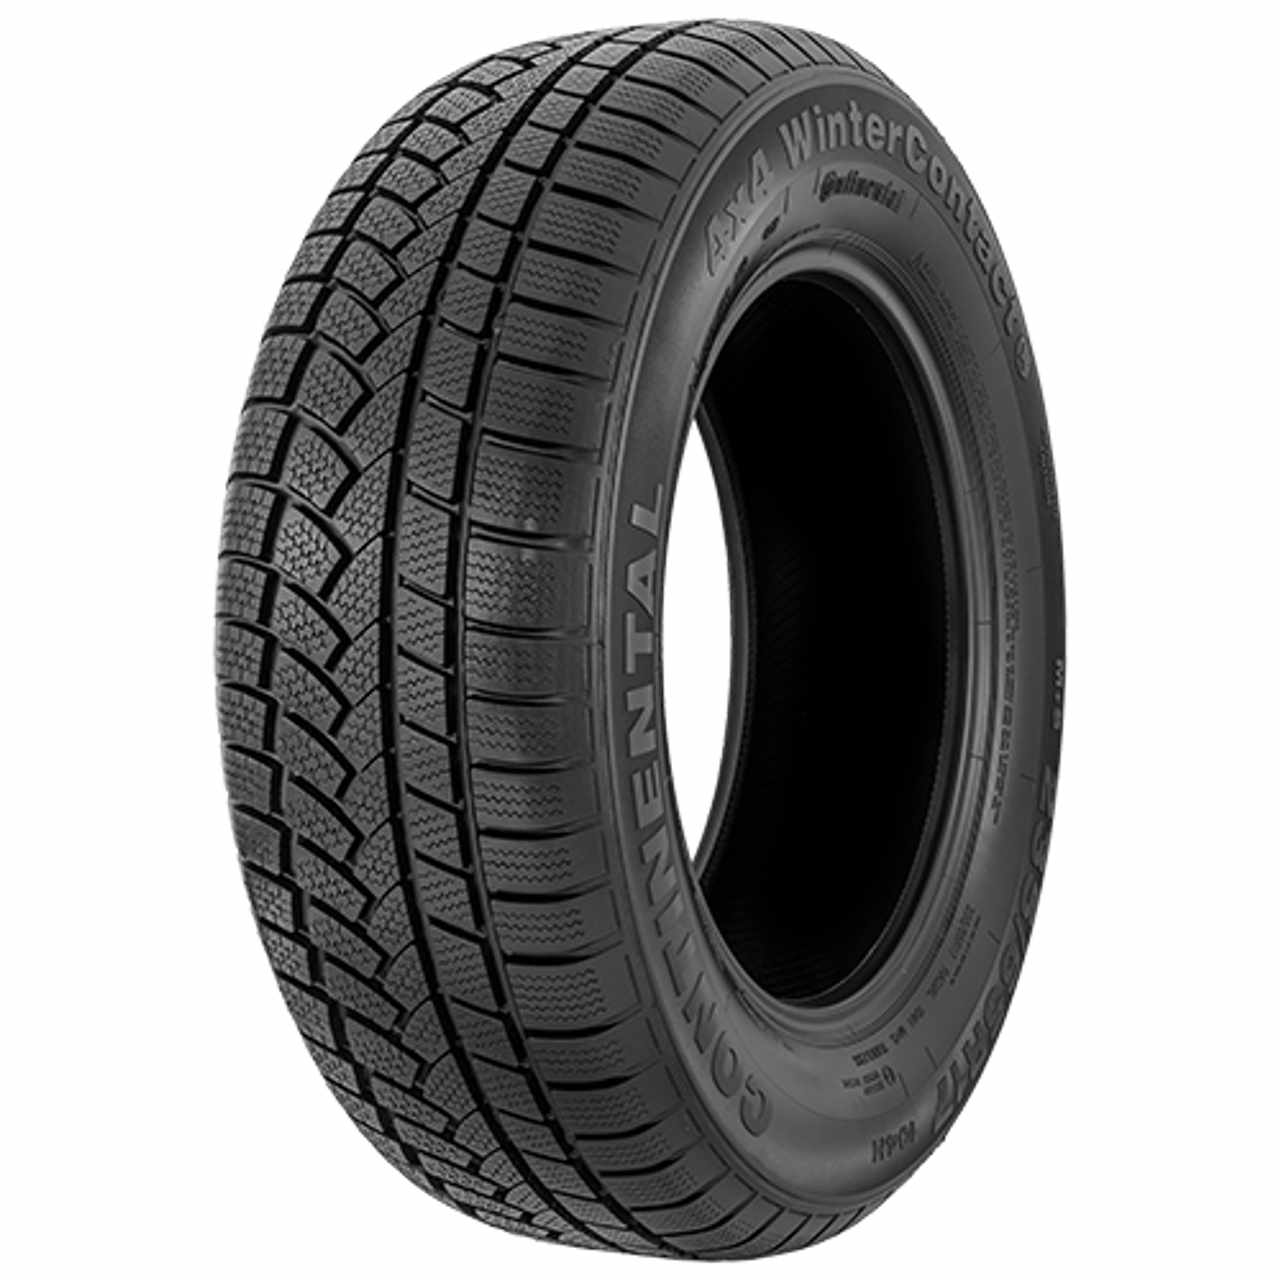 CONTINENTAL CONTI4X4WINTERCONTACT (*) 255/55R18 105H FR BSW